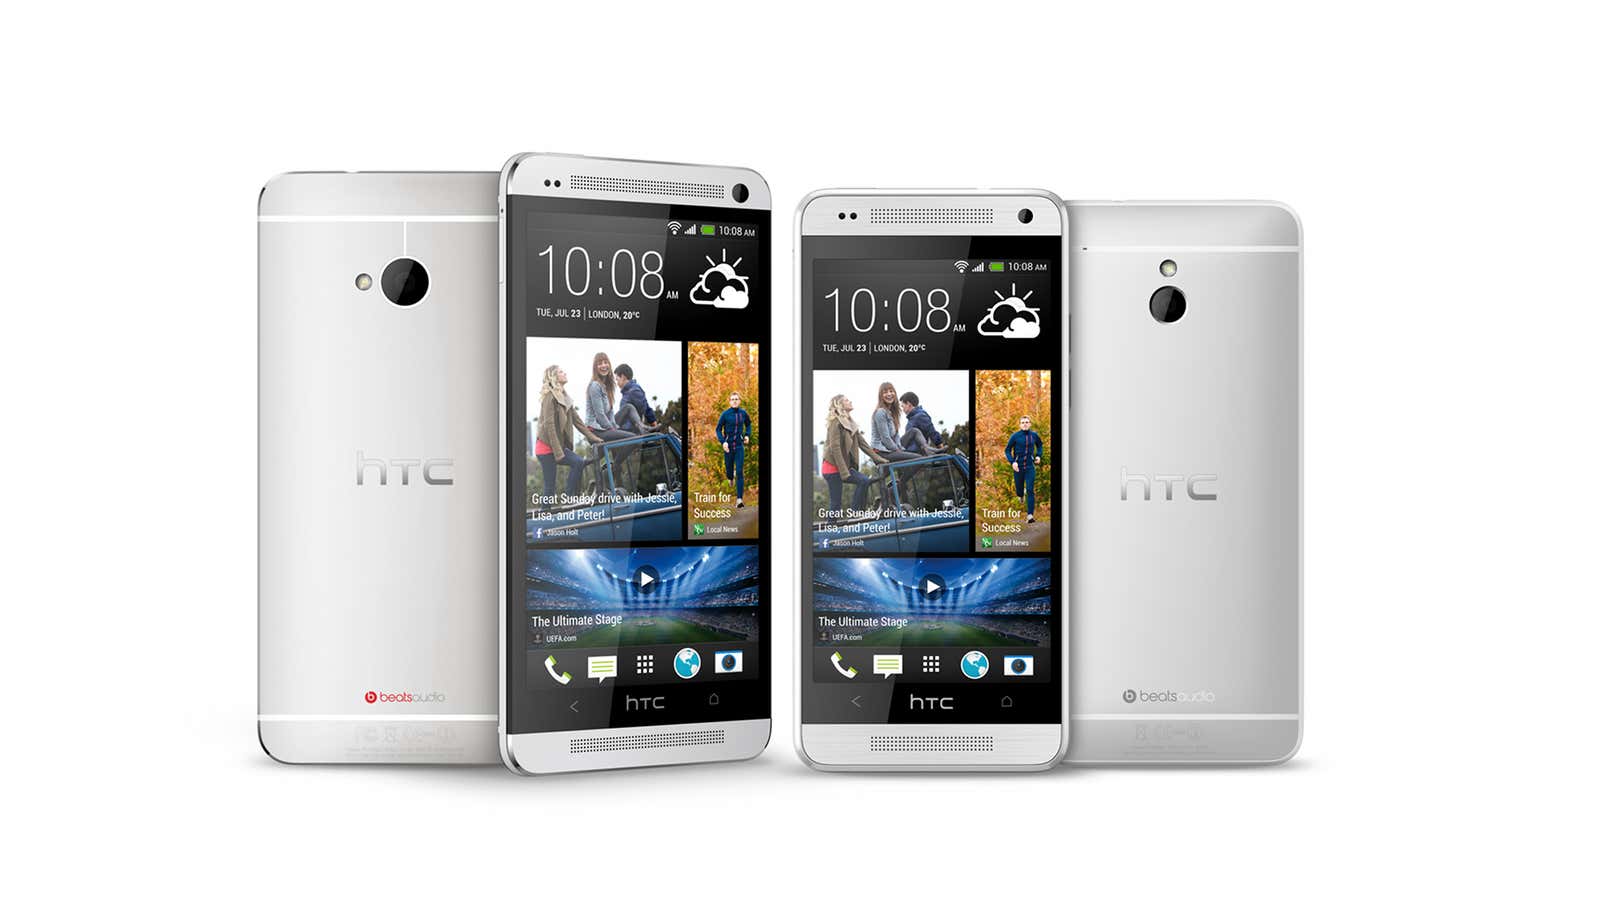 Next to the flagship HTC One, the “mini” doesn’t look it.